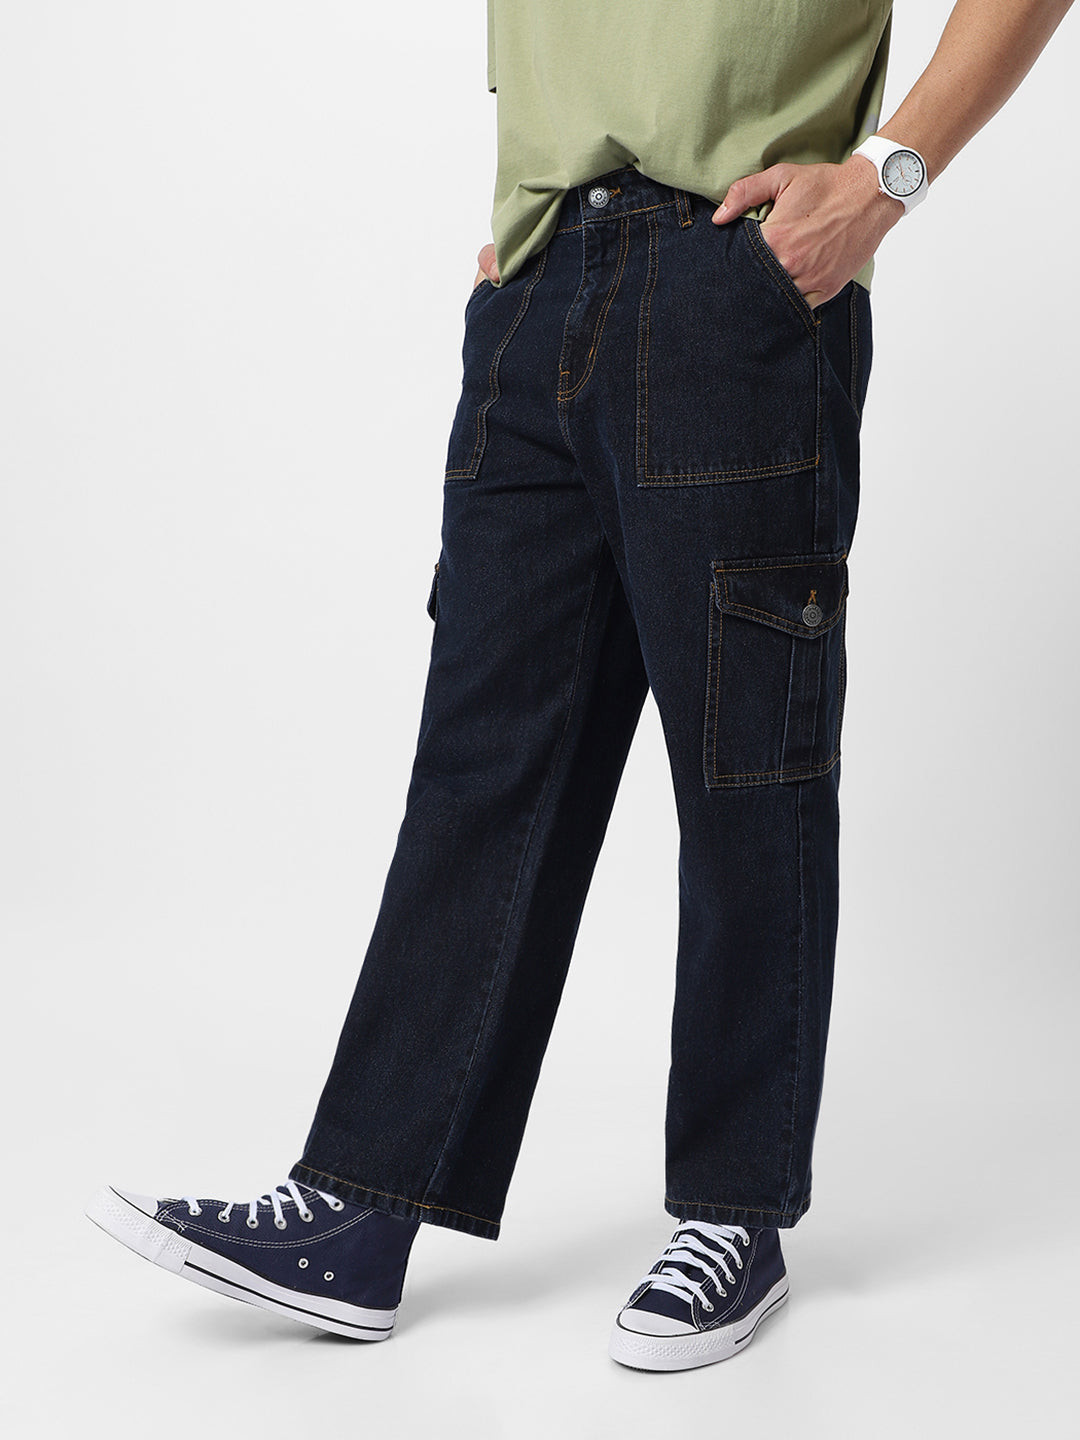 Men's Blue Loose Baggy Fit Cargo Jeans with 6 Pockets Non-Stretchable